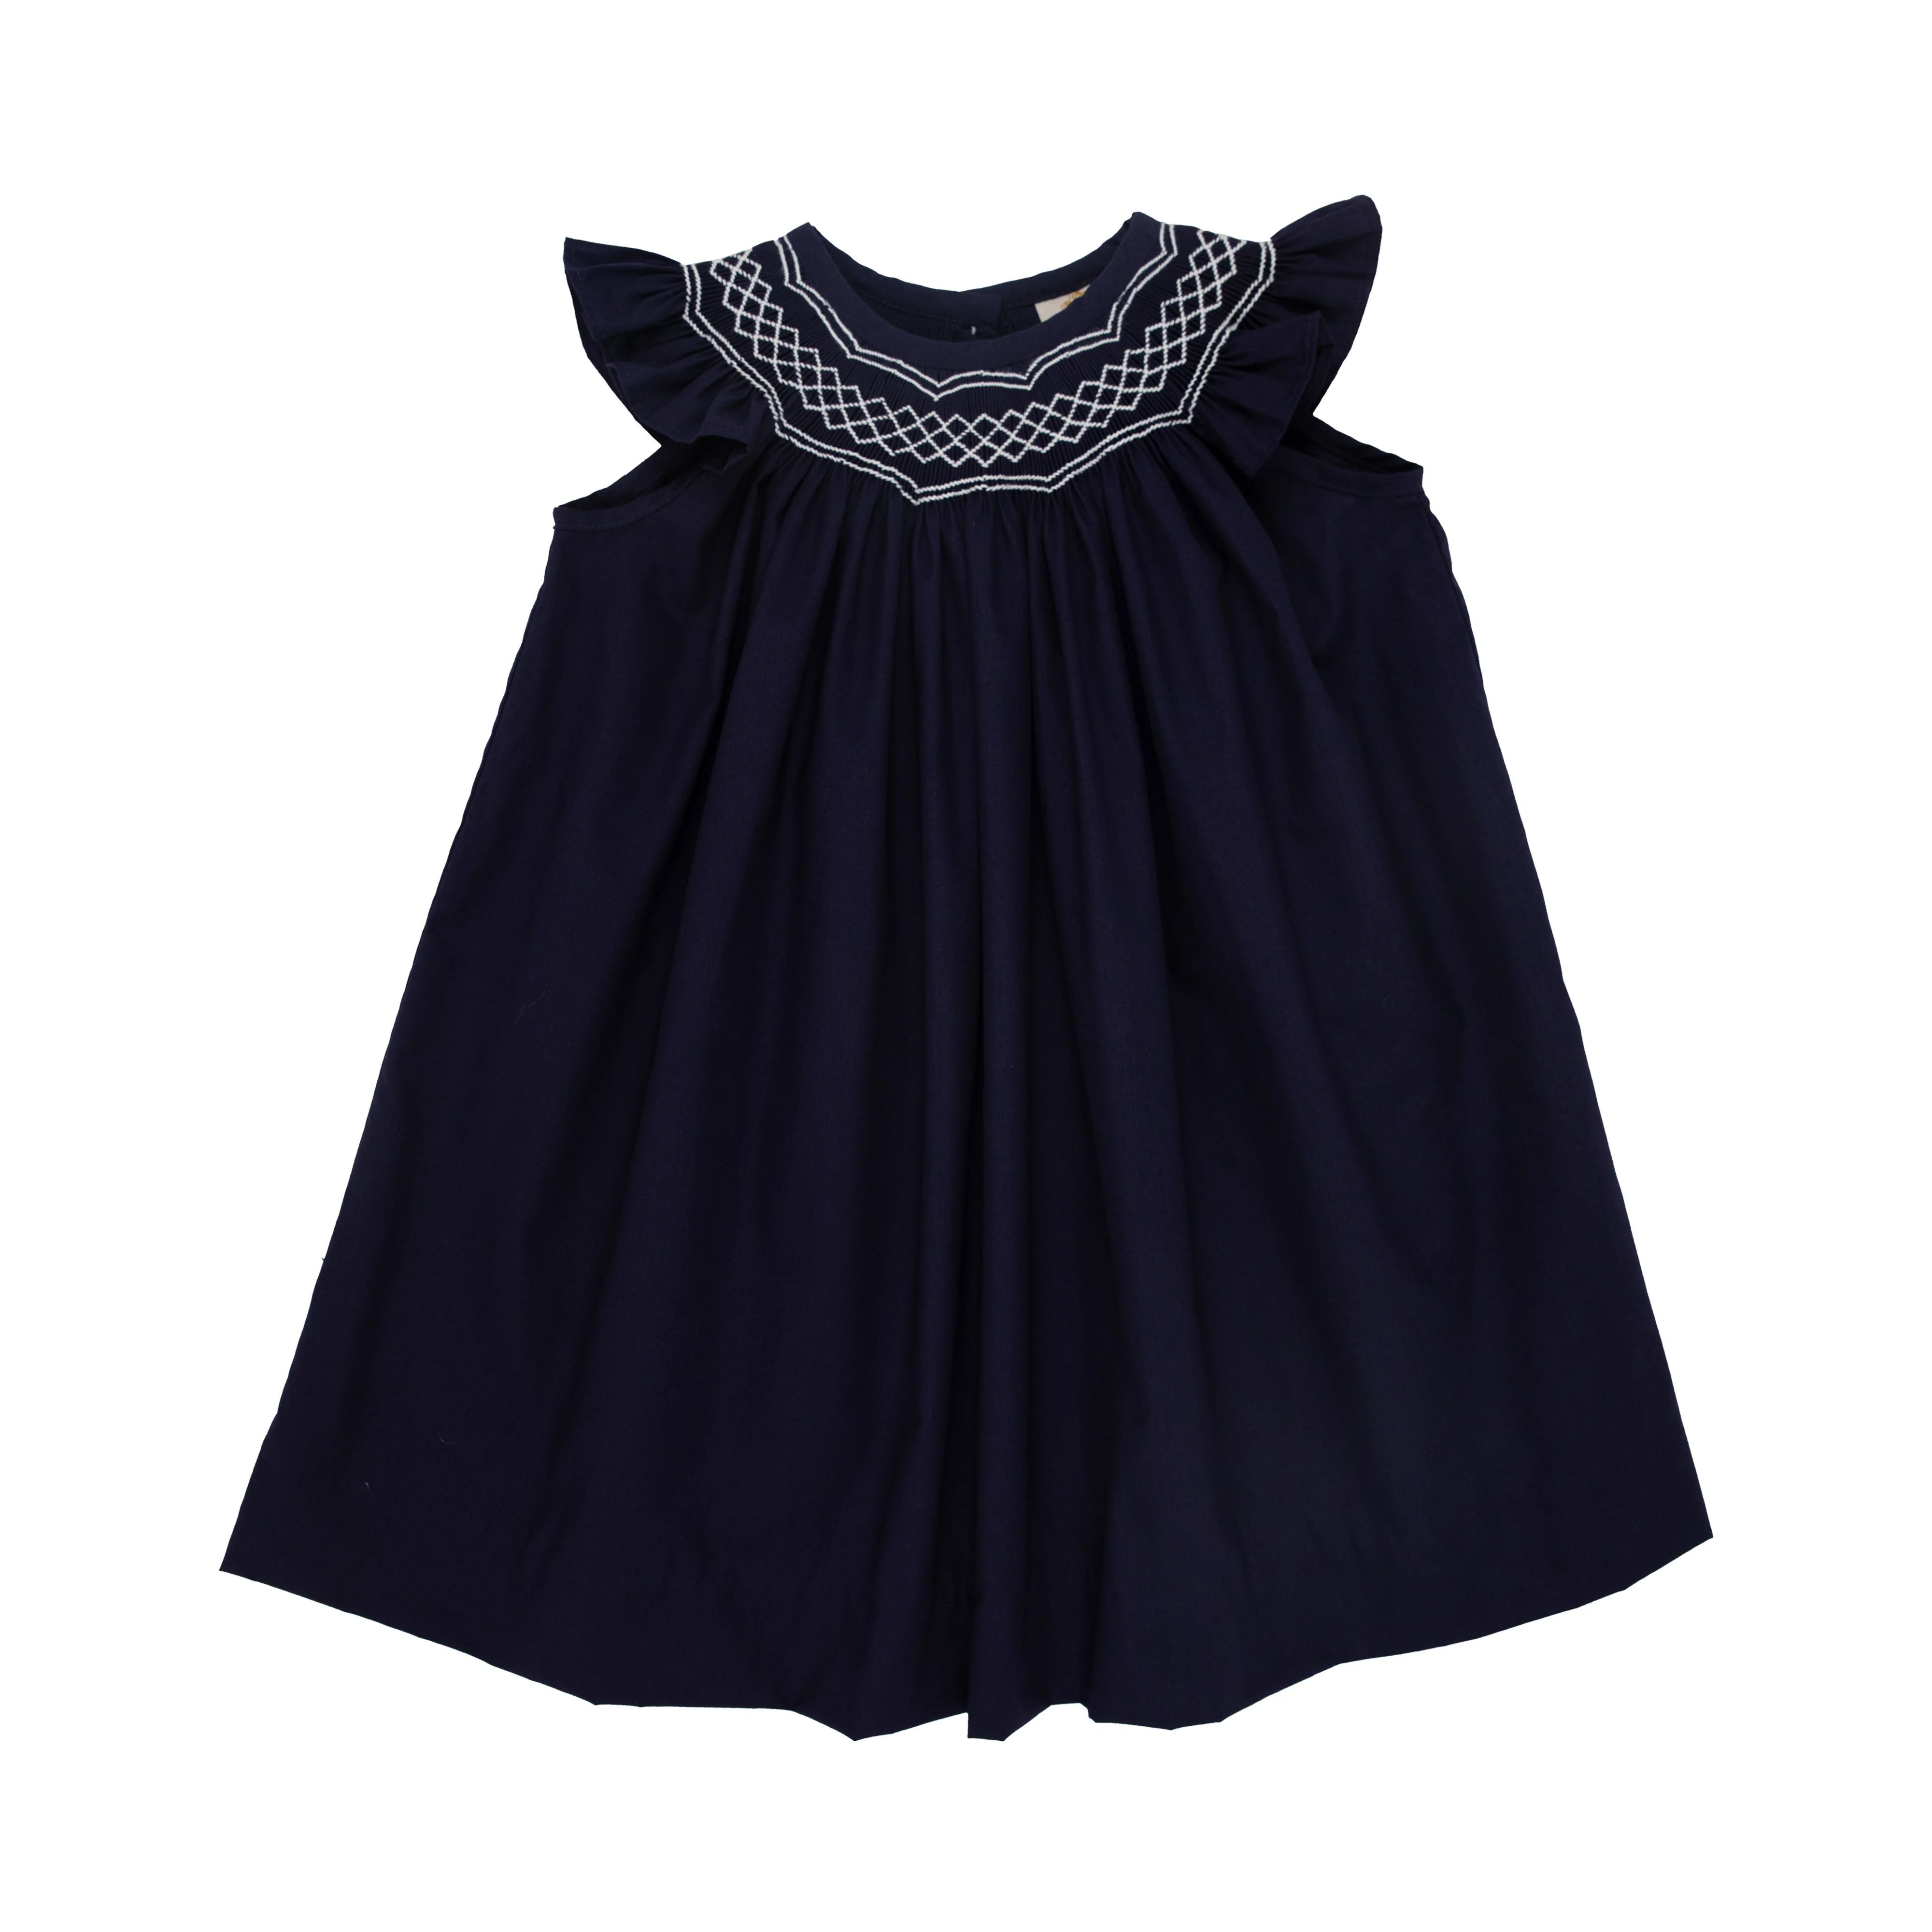 Angel Sleeve Sandy Smocked Dress - Nantucket Navy with Worth Avenue White Smocking & Picot | The Beaufort Bonnet Company